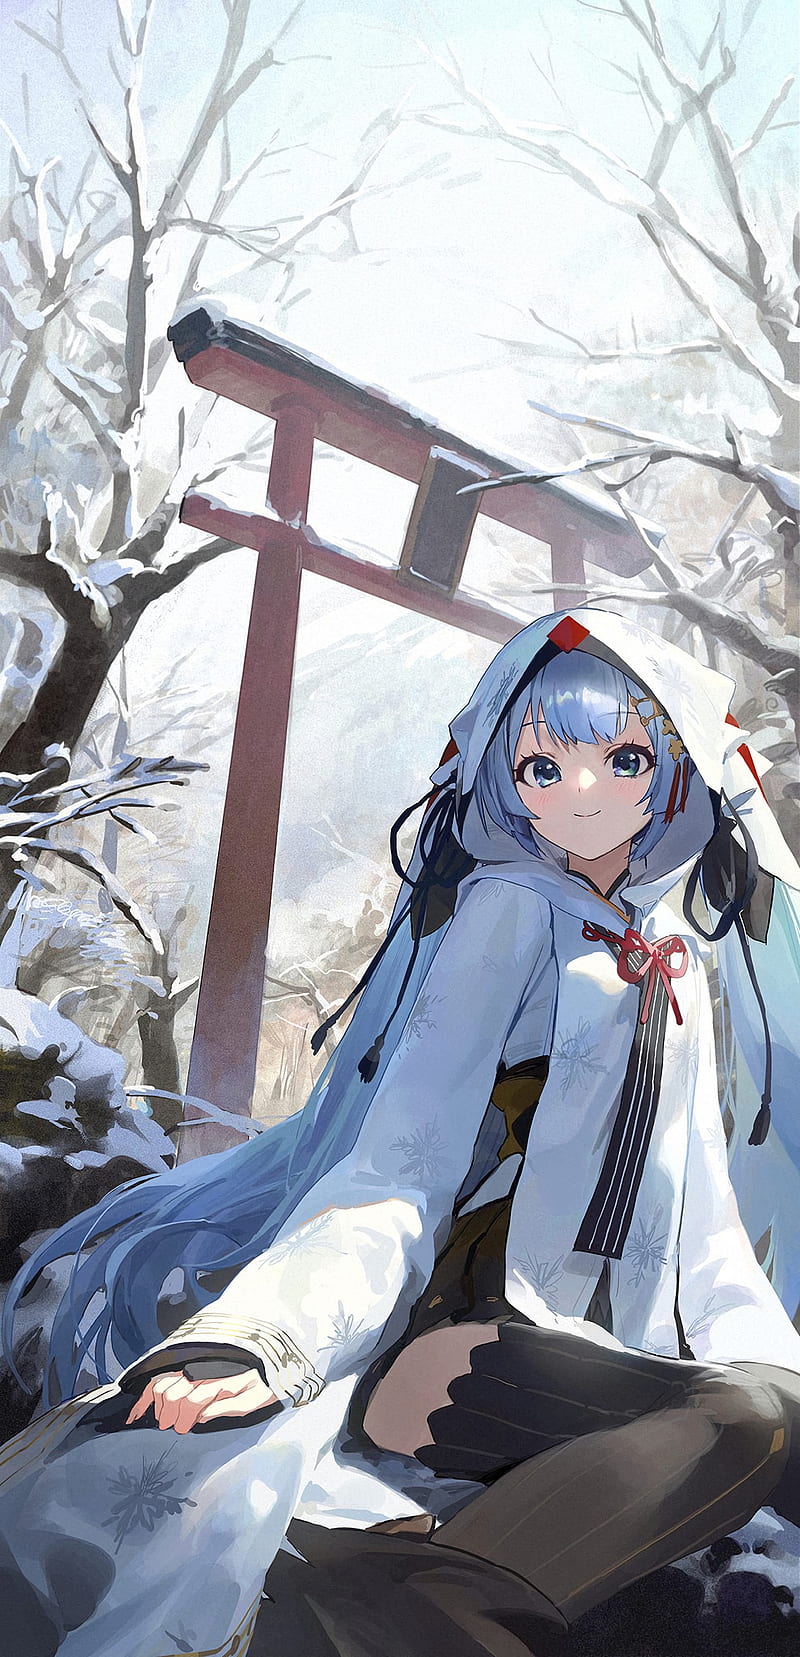 The Coolest Winter-Themed Anime Figures! | Solaris Japan